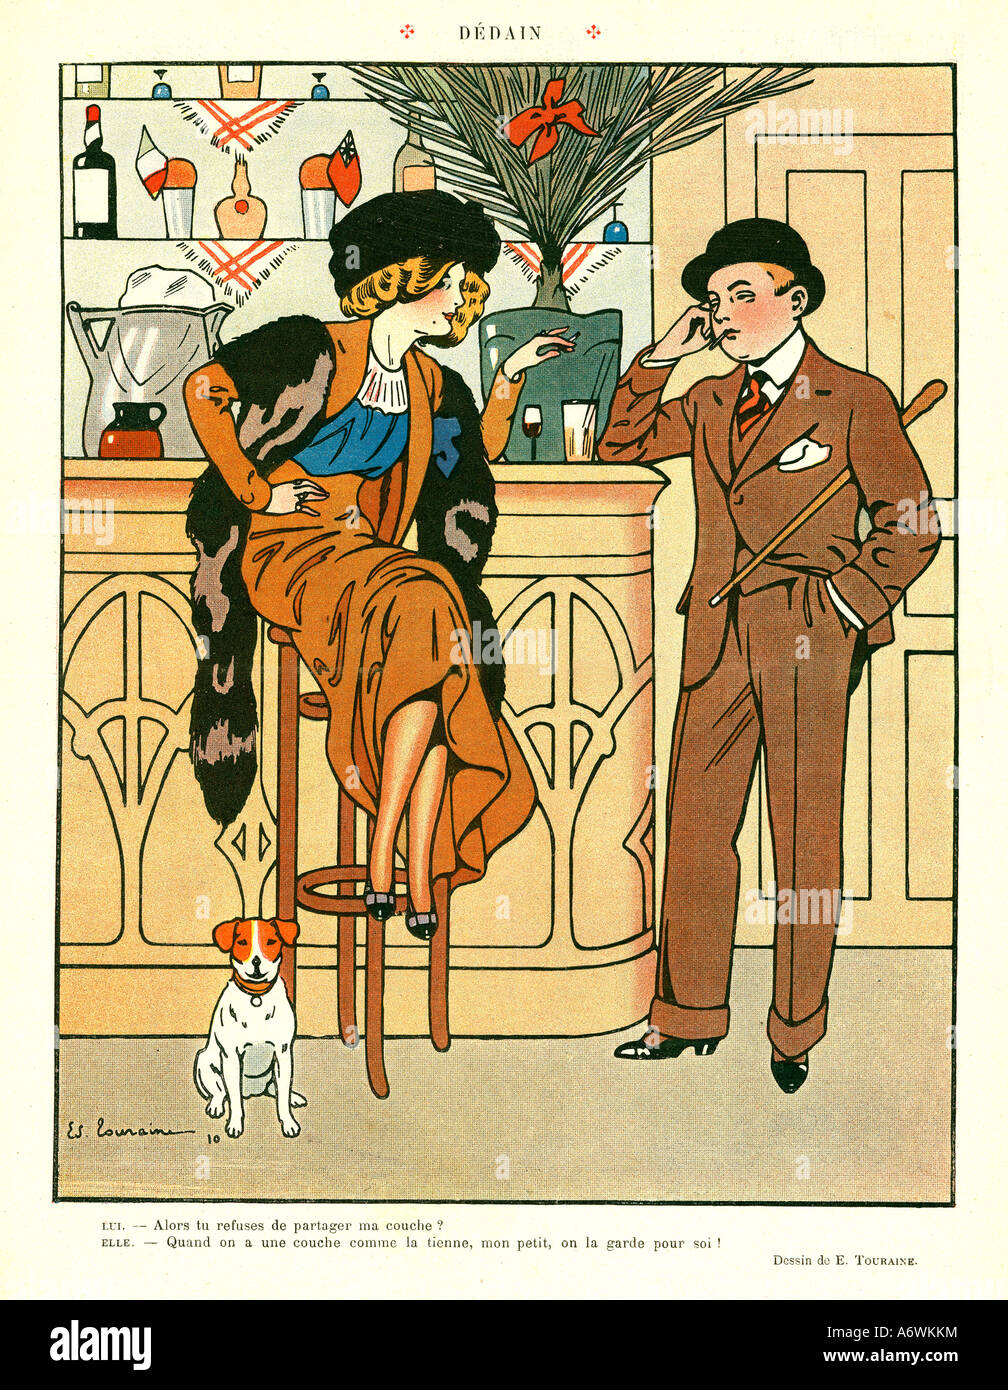 Dedain disdain indeed as the puts down a proposition from the man at the bar in this 1910 French cartoon Stock Photo